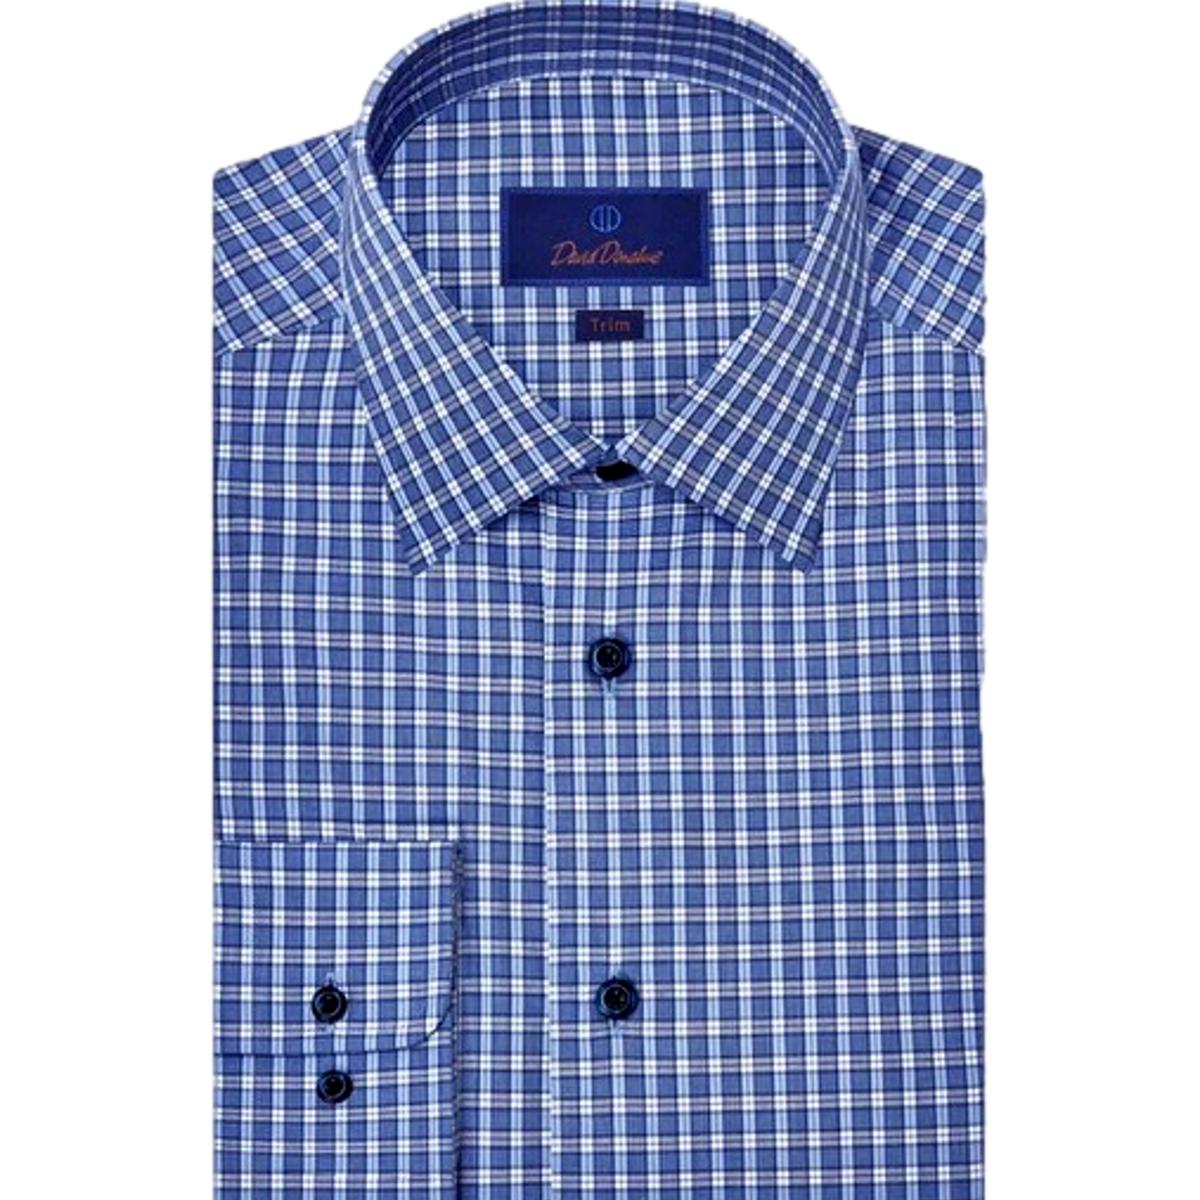 Checked Dress Shirt - Family Britches